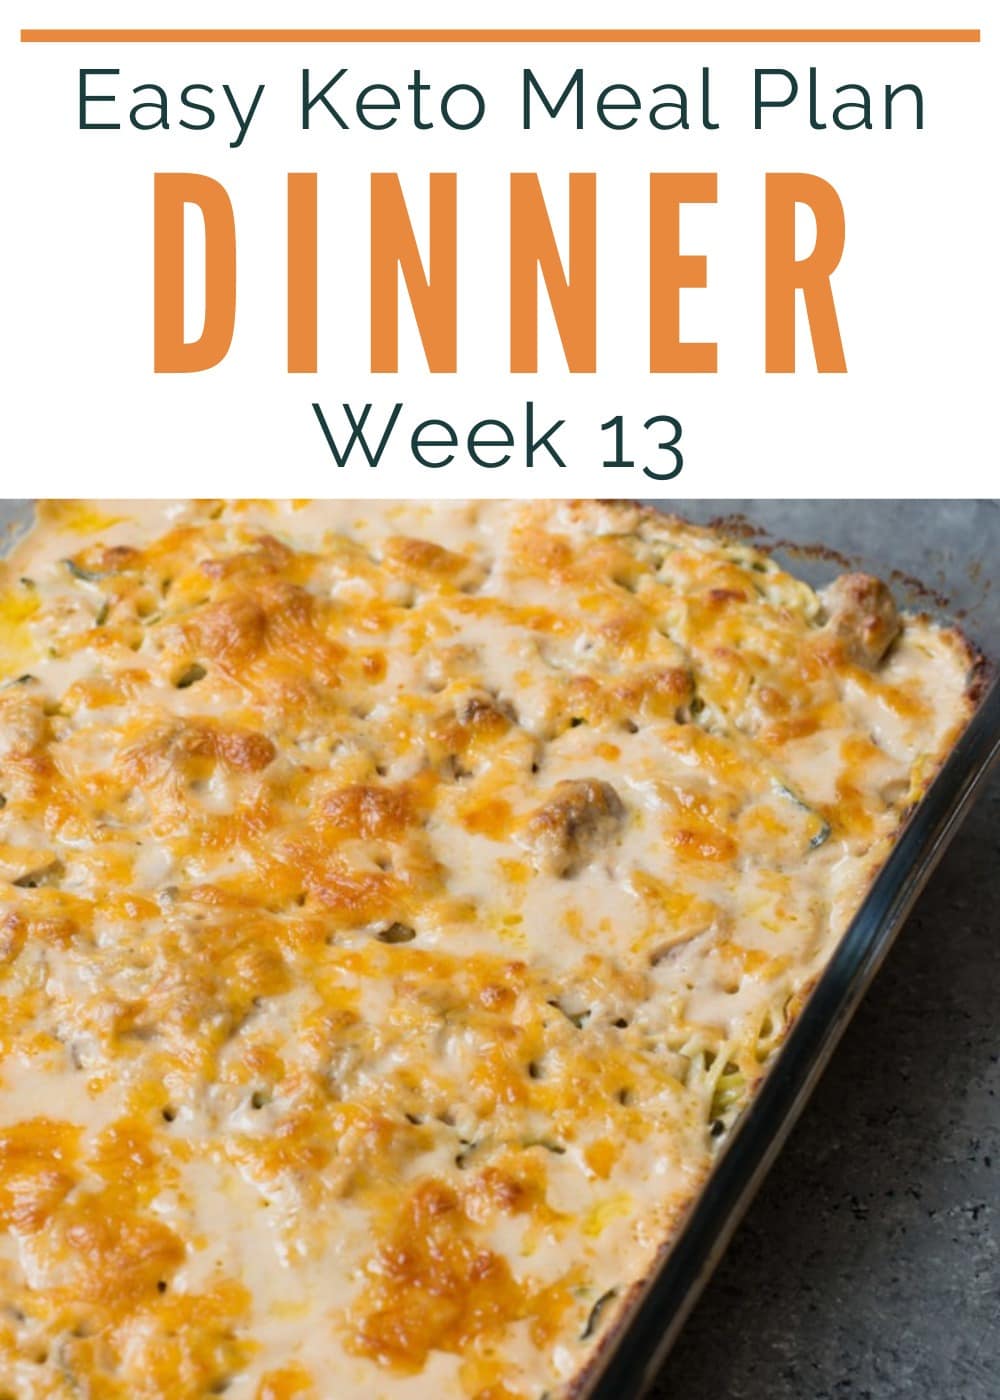 This week’s Easy Keto Meal Plan includes 5 easy low-carb dinner as well as a keto-friendly breakfast. I’ve included net carb counts, serving amounts, and a printable shopping list!